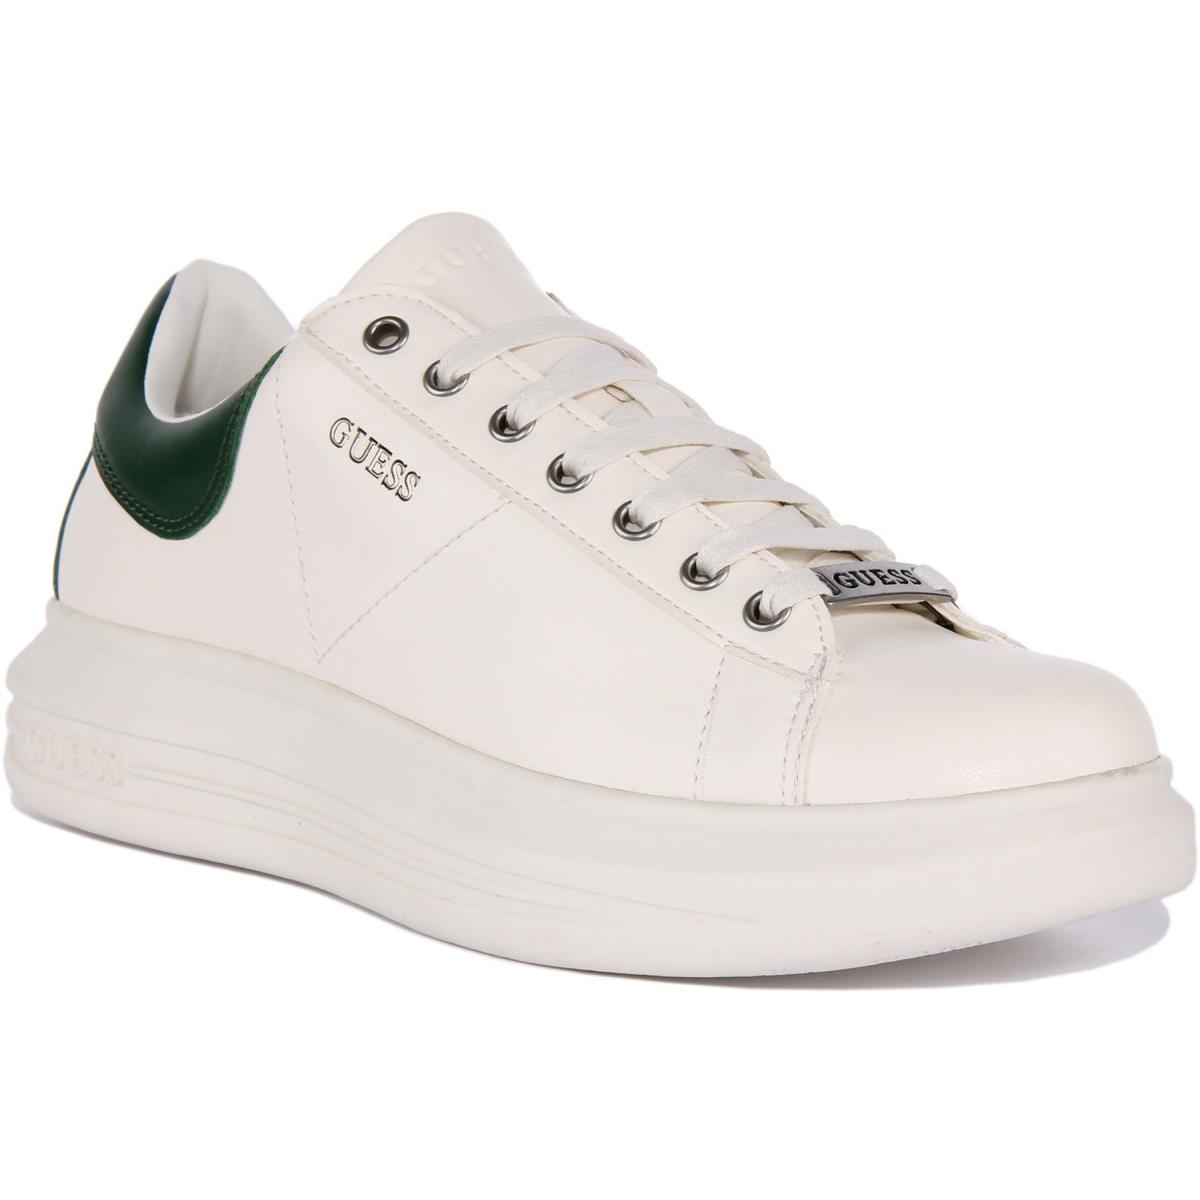 Guess Vibo Casual Lace Up Sneaker White Green Mens US 7 - 13 WHITE GREEN